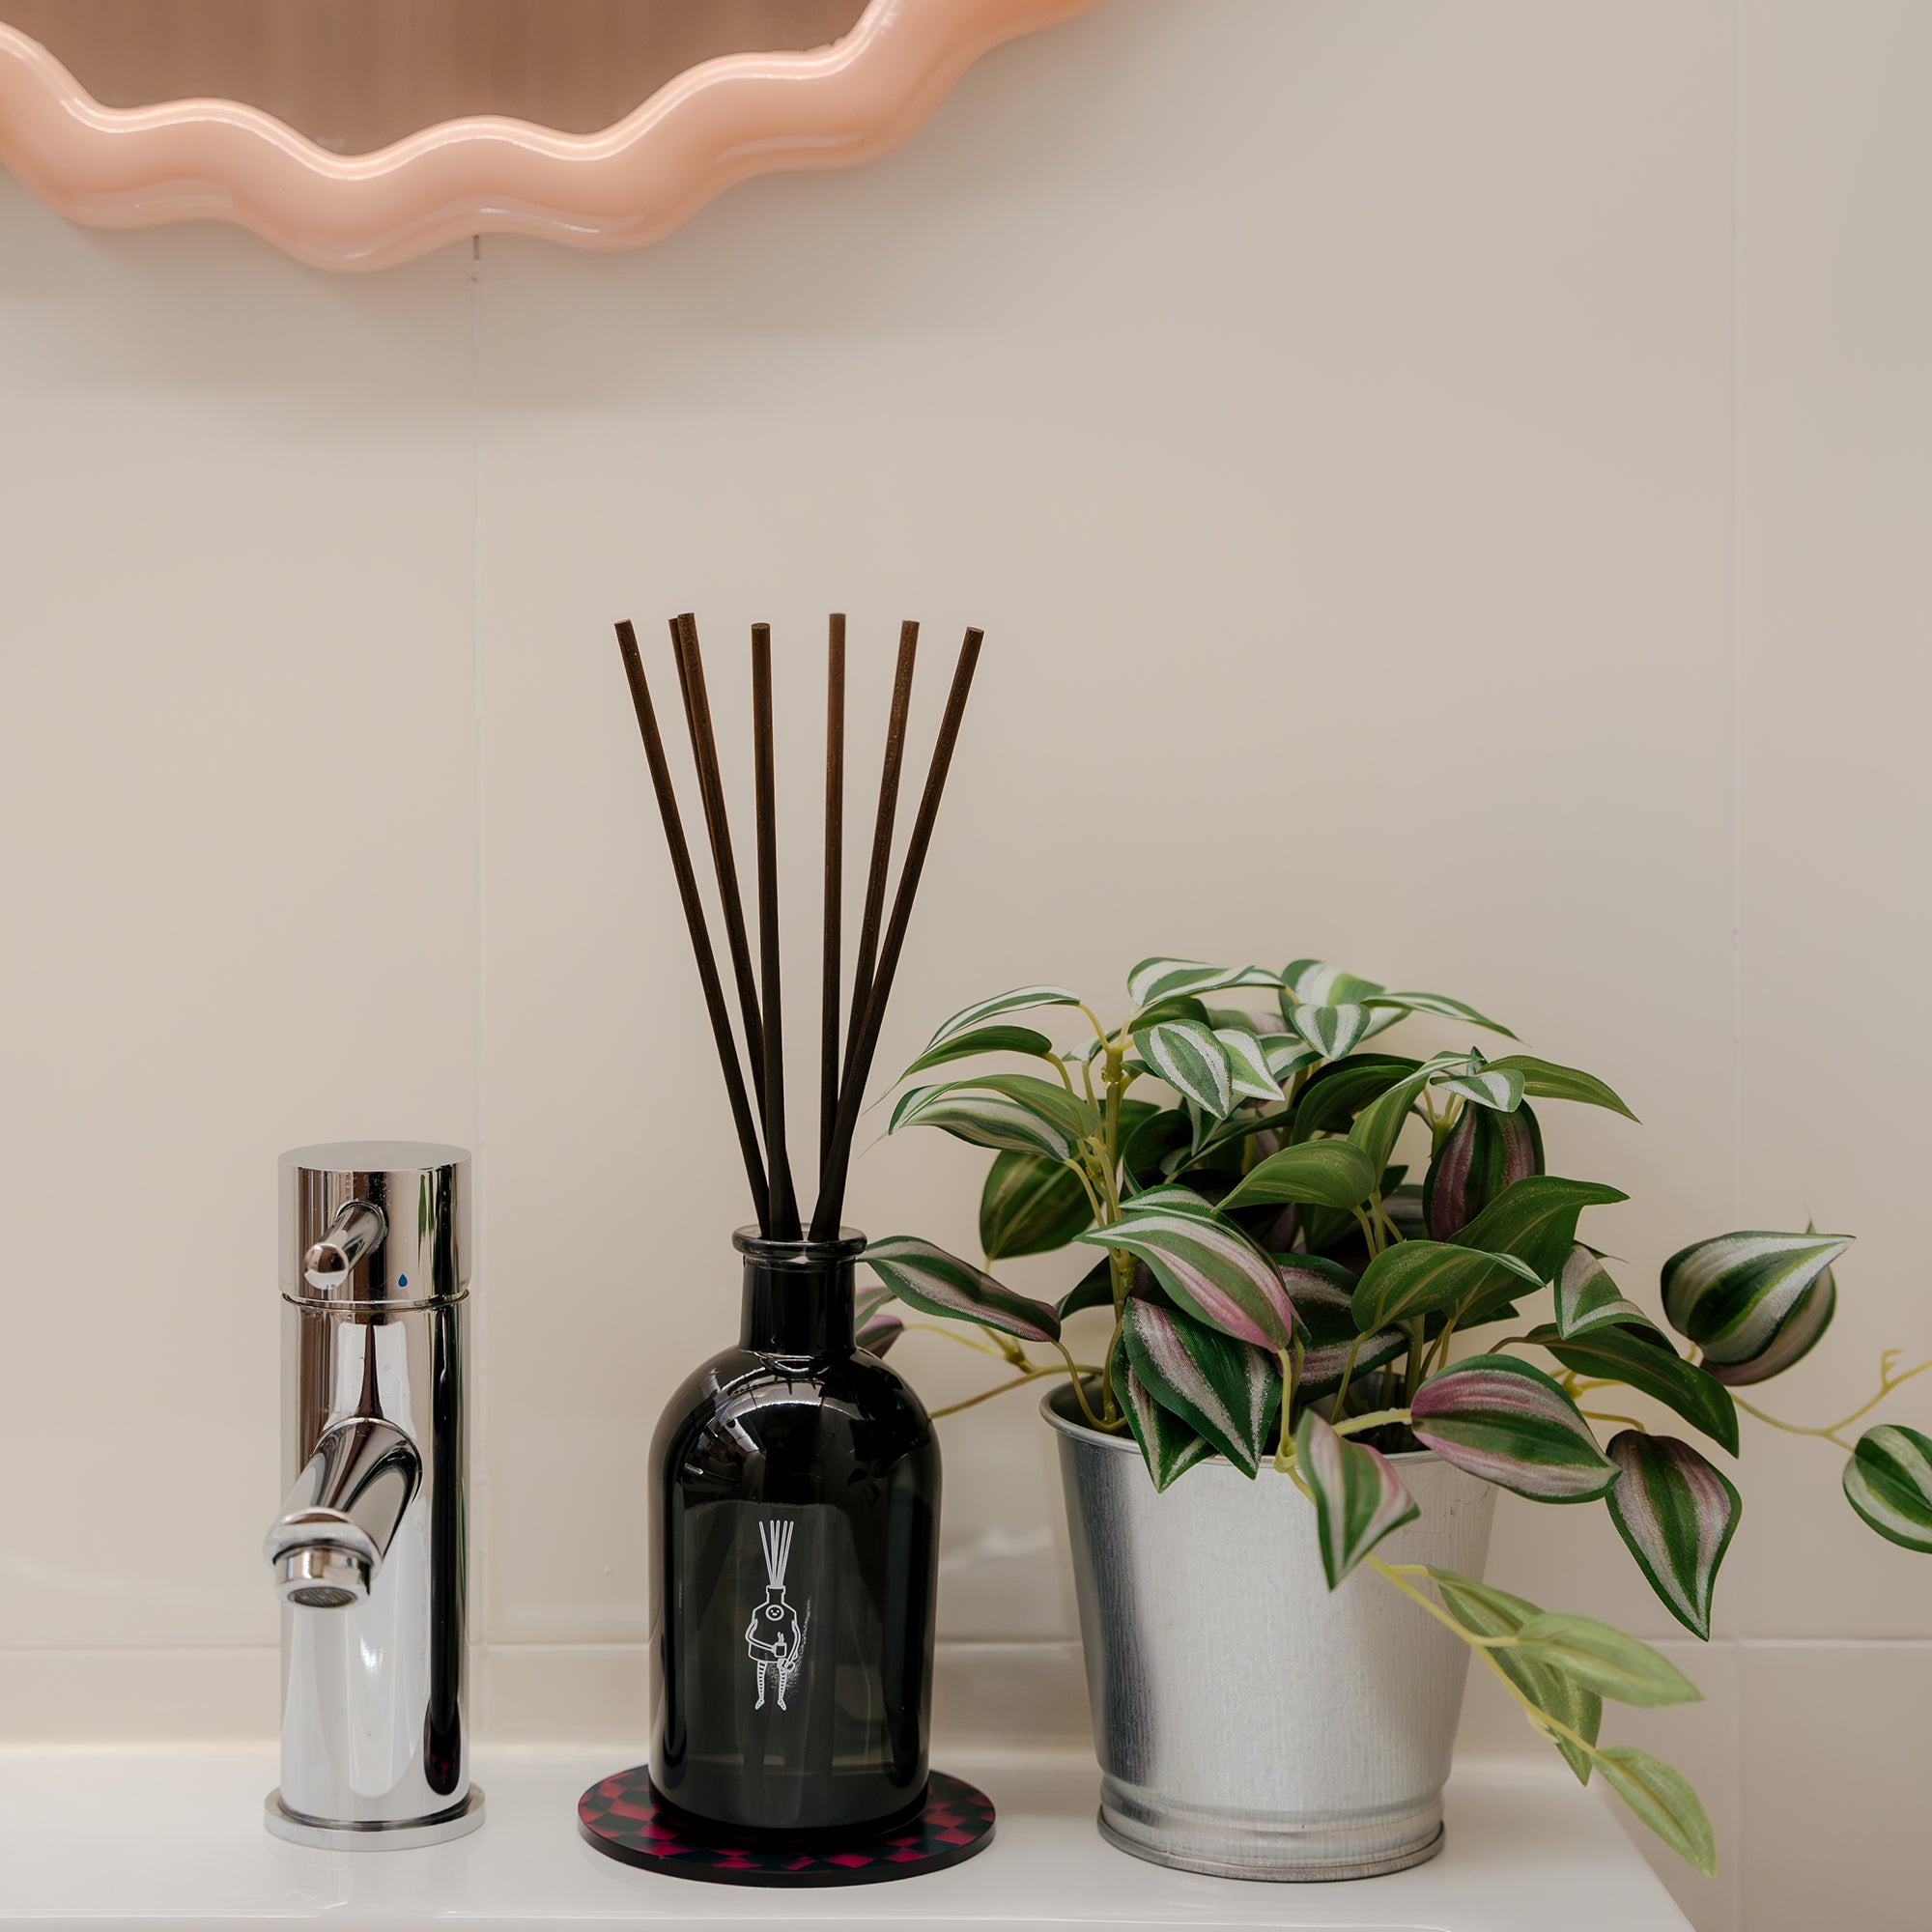 how to use reed diffuser in bathroom